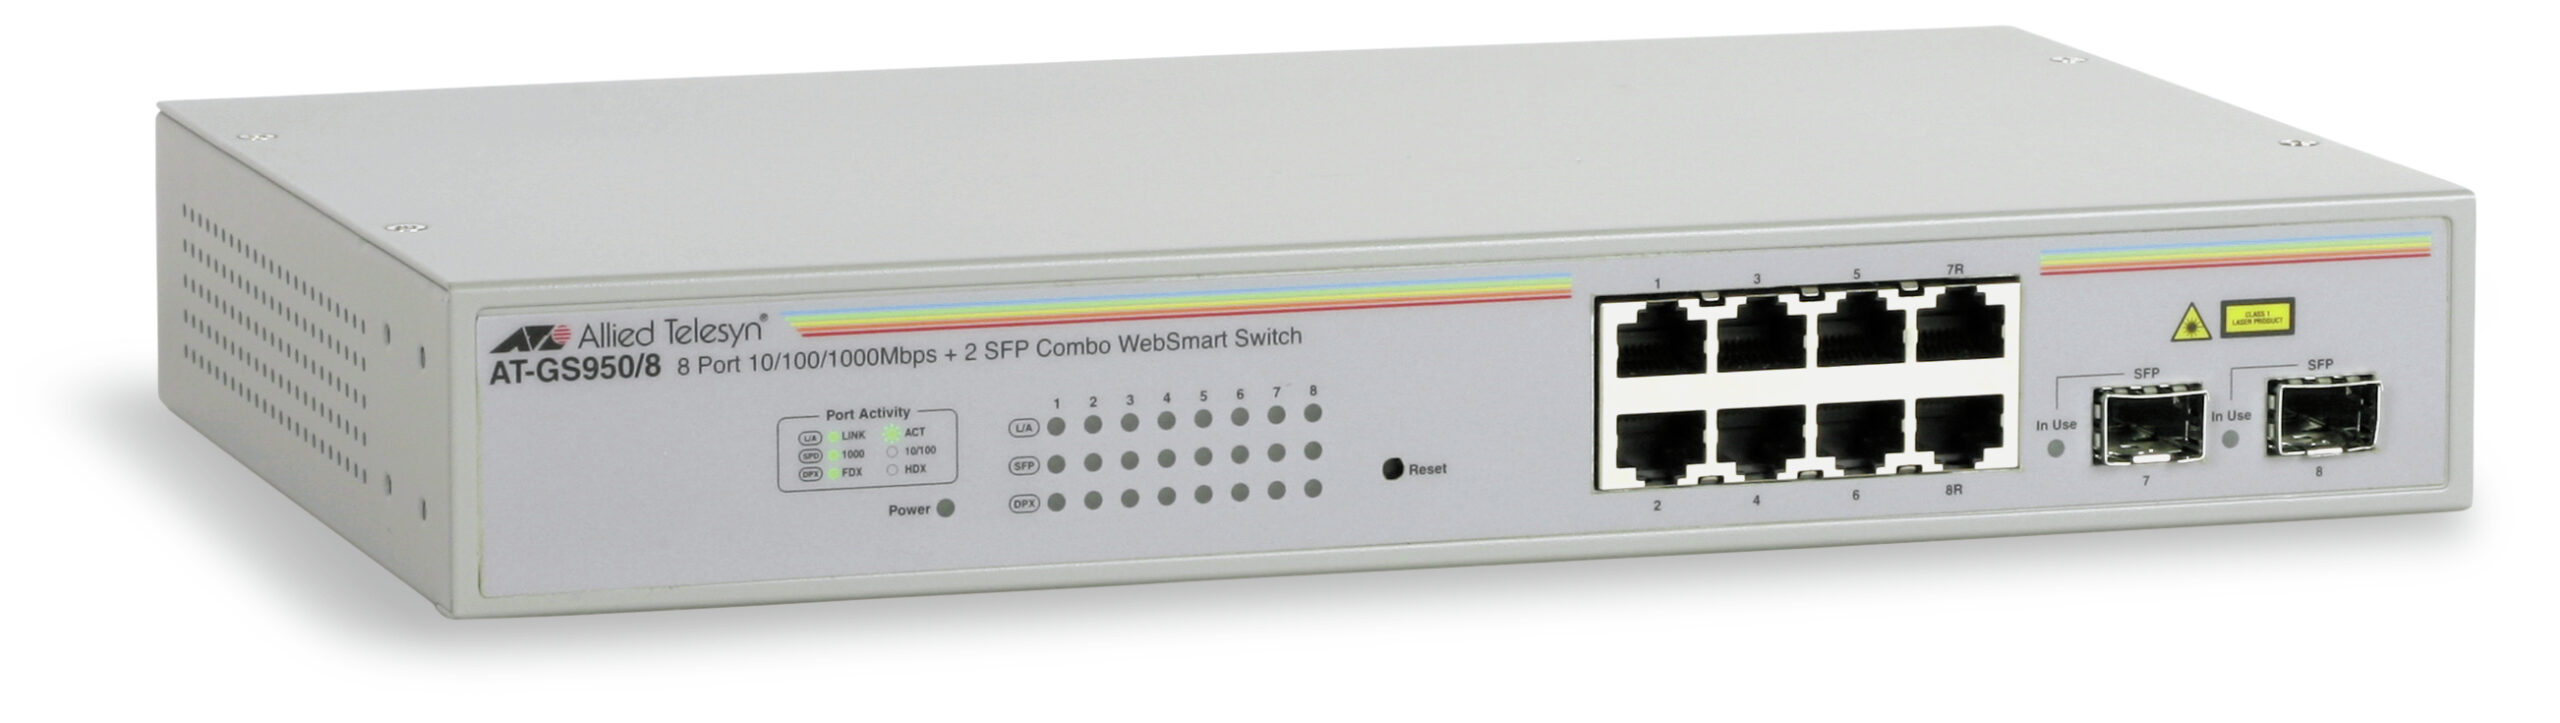 Web Smart Switch 8 Port Allied Telesis Non Eis At Gs950 8 50 767035181349